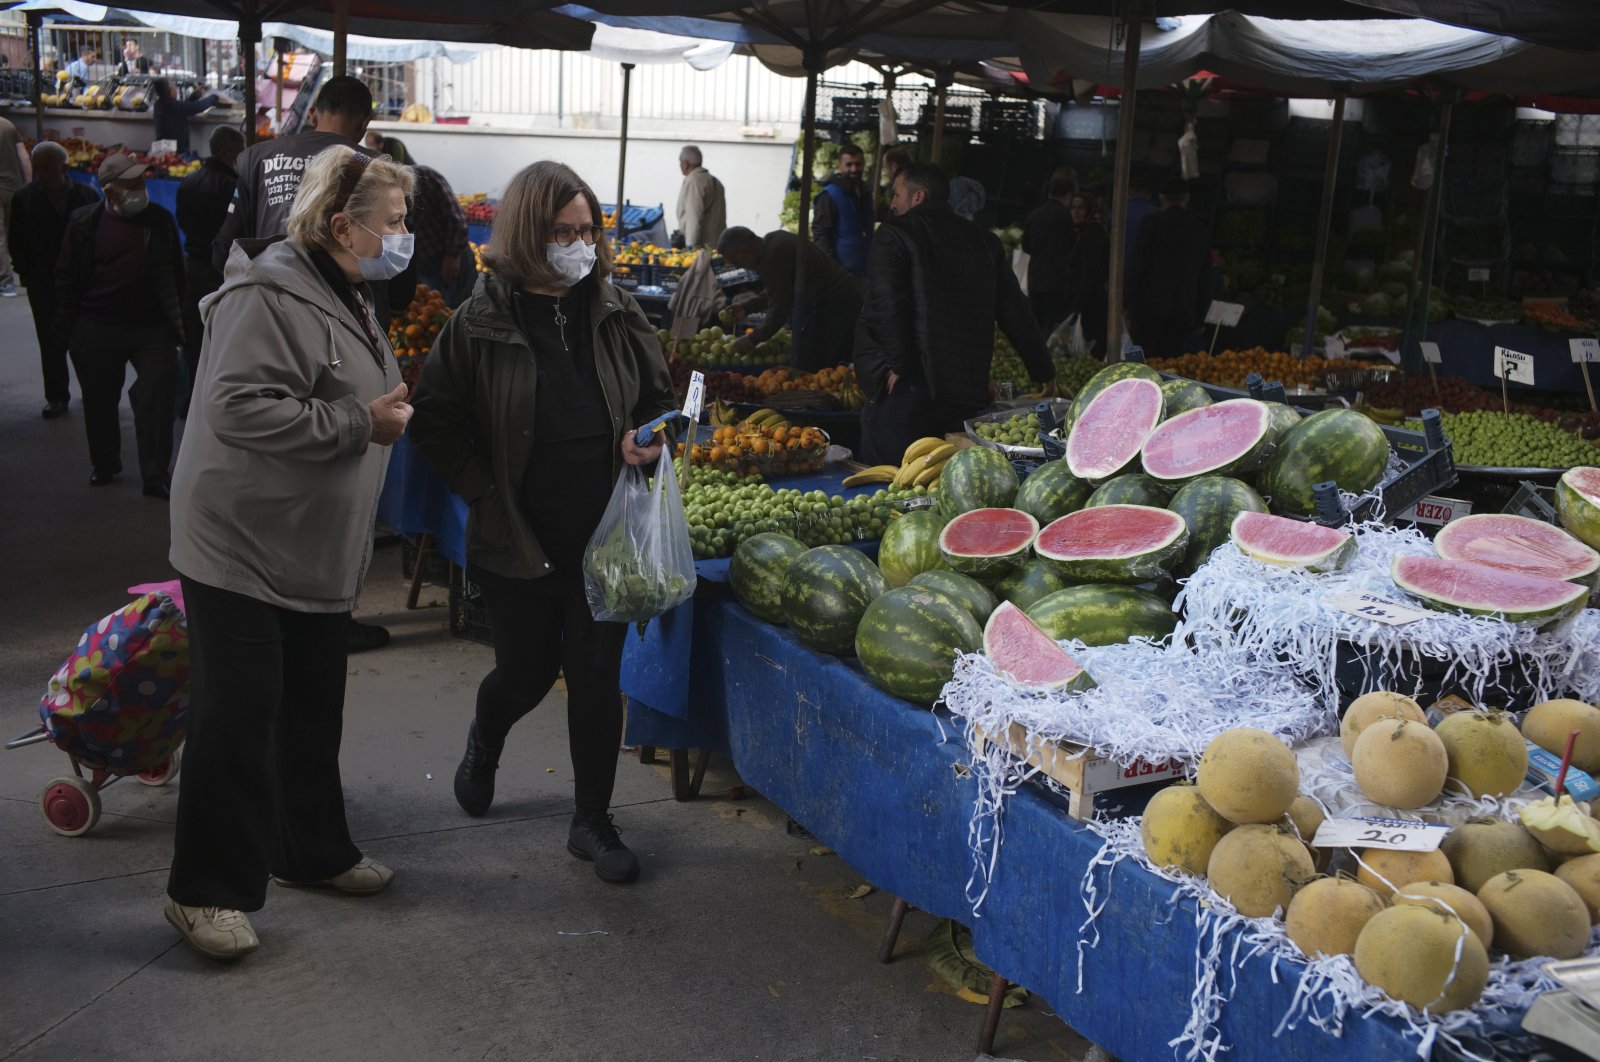 People buy local products at an open air food market, in Ankara, Turkey, May 8, 2022. (AP Photo)